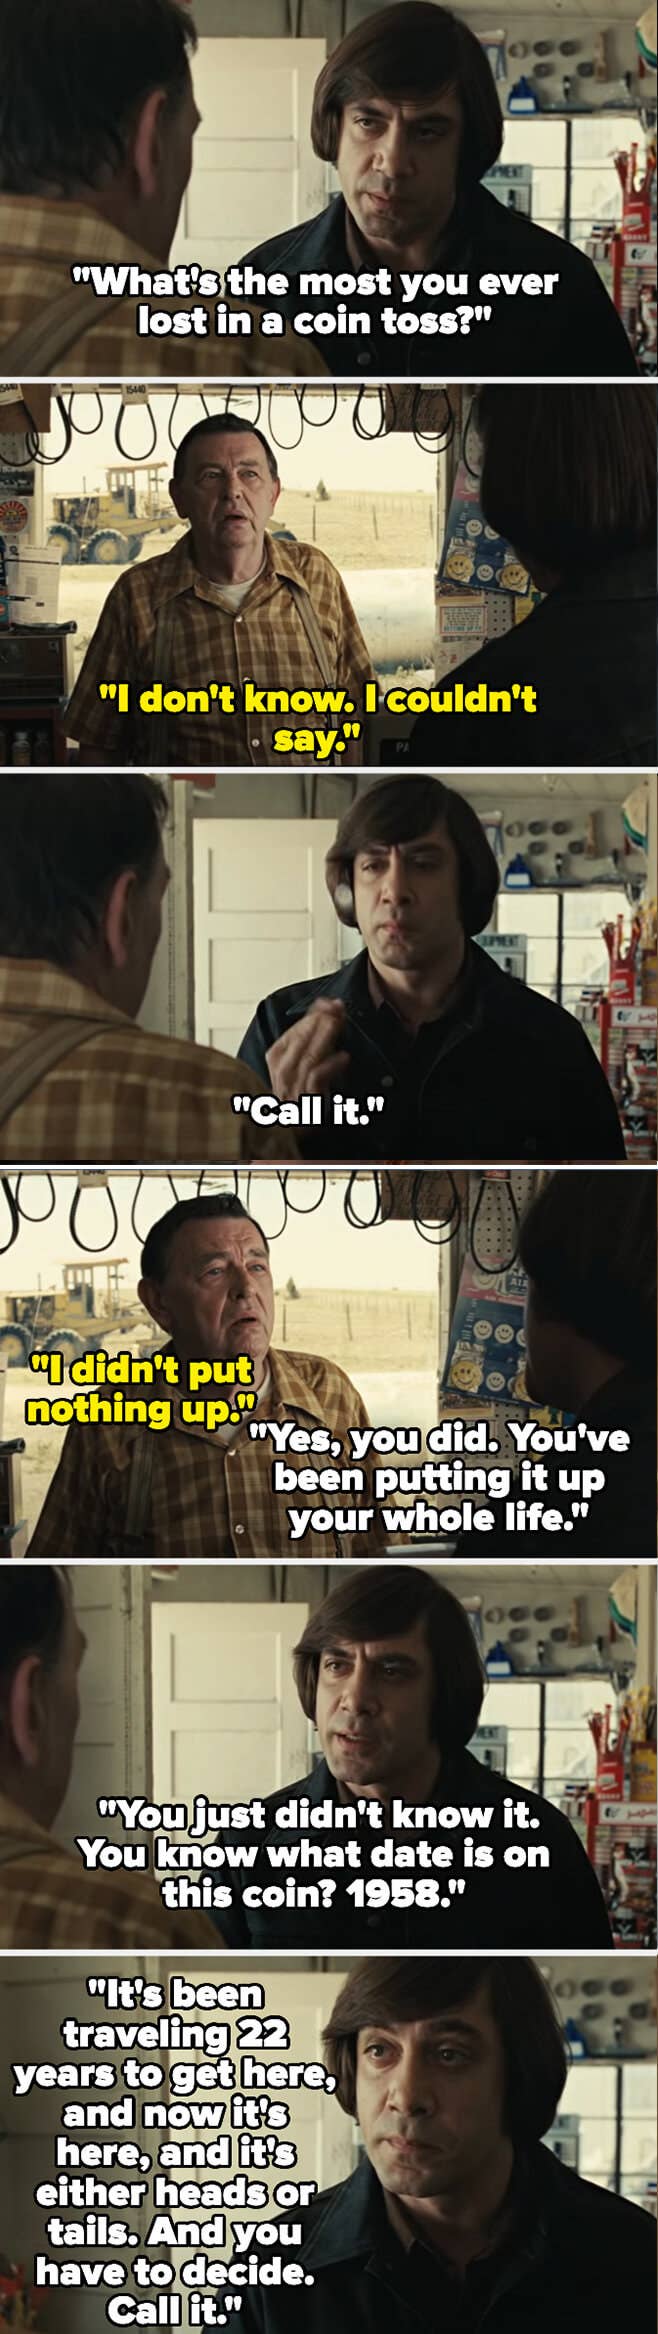 Anton Chigurh in &quot;No Country for Old Men&quot;